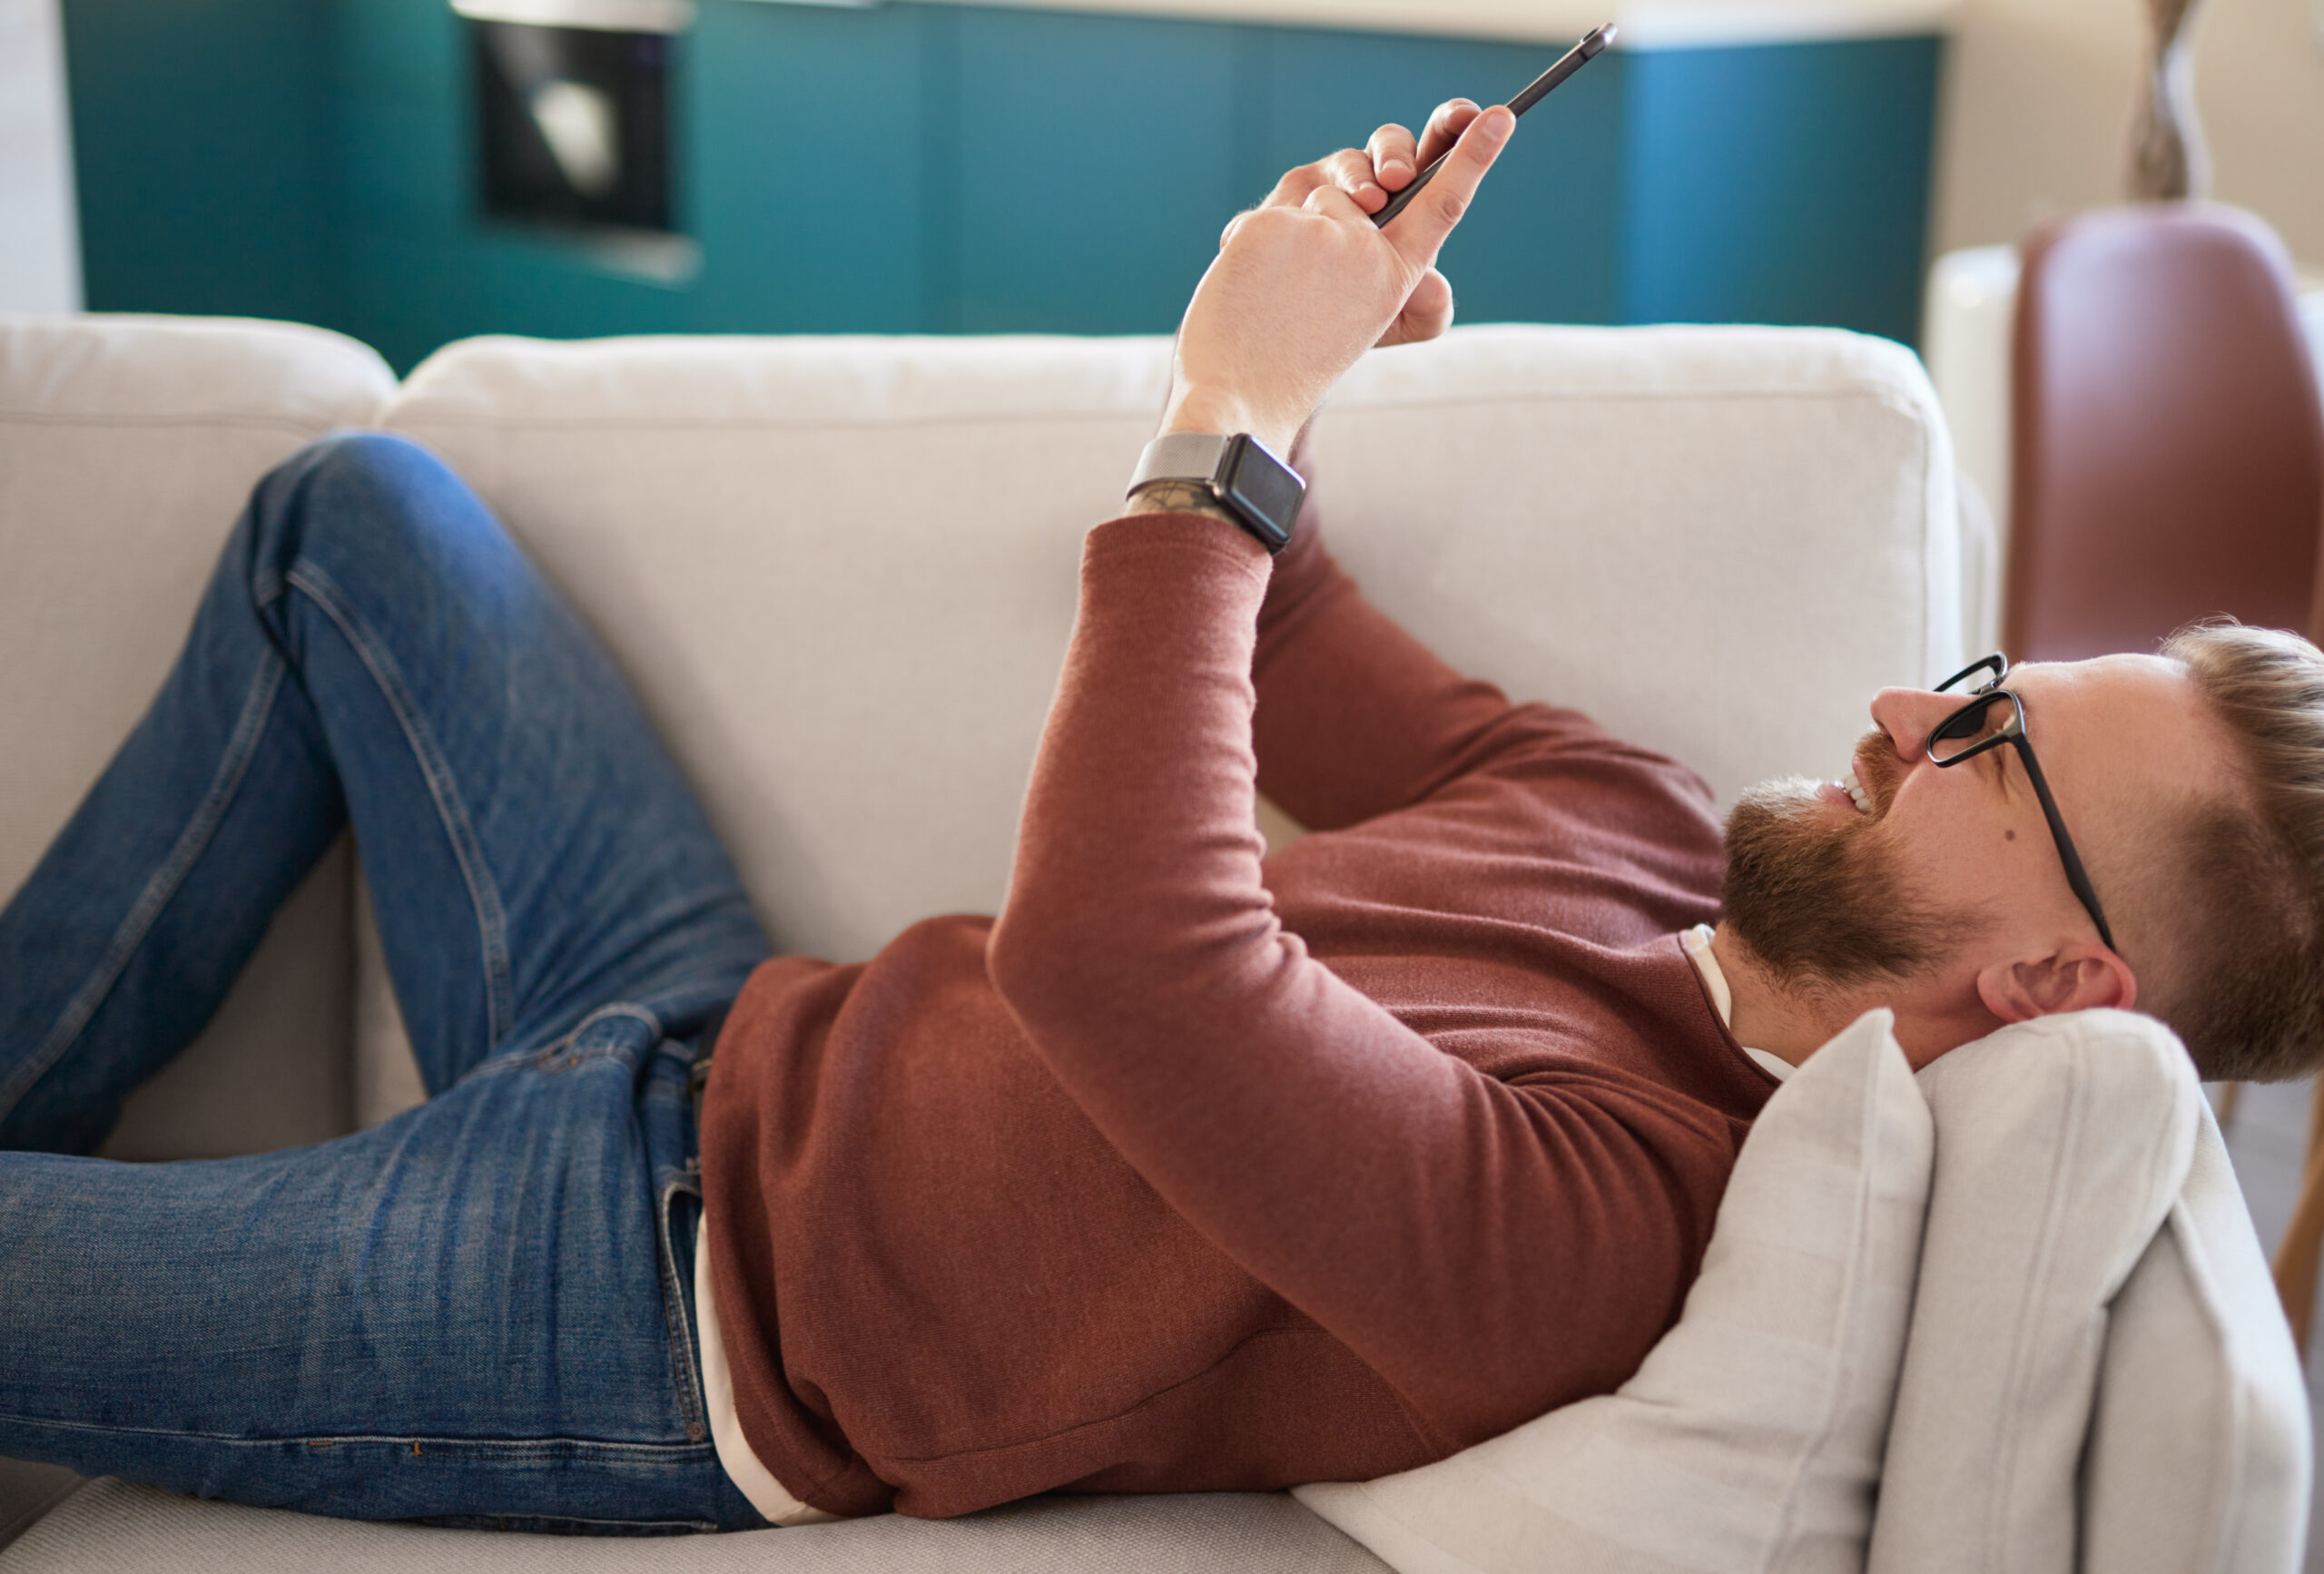 Cheerful person lying on a couch using a smartphone to browse a great multifamily website design